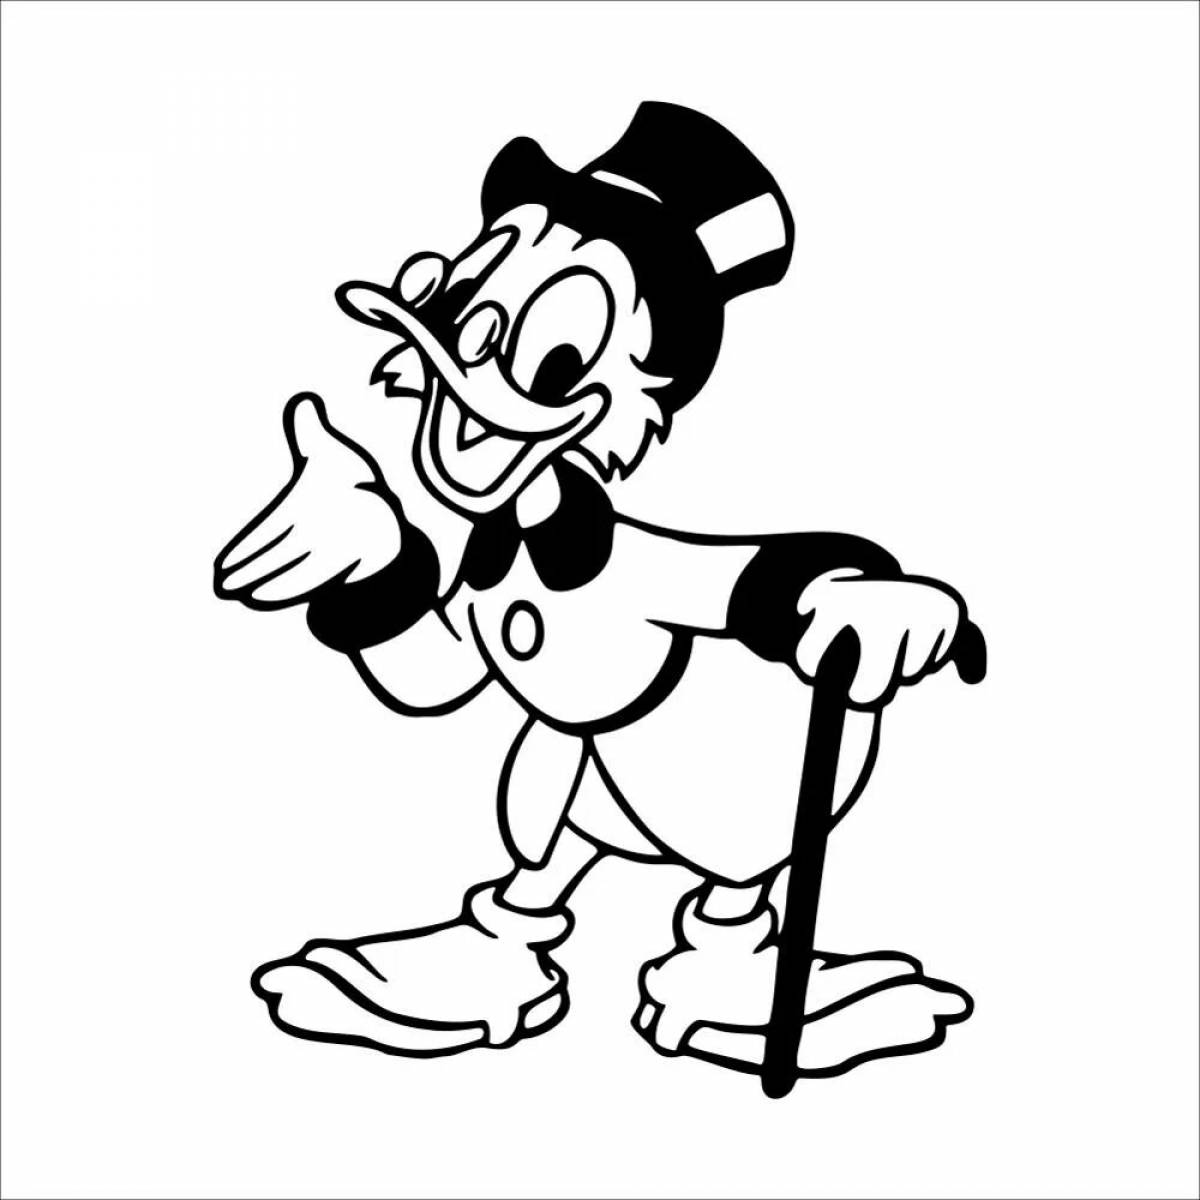 Rampant Twist McDuck coloring page